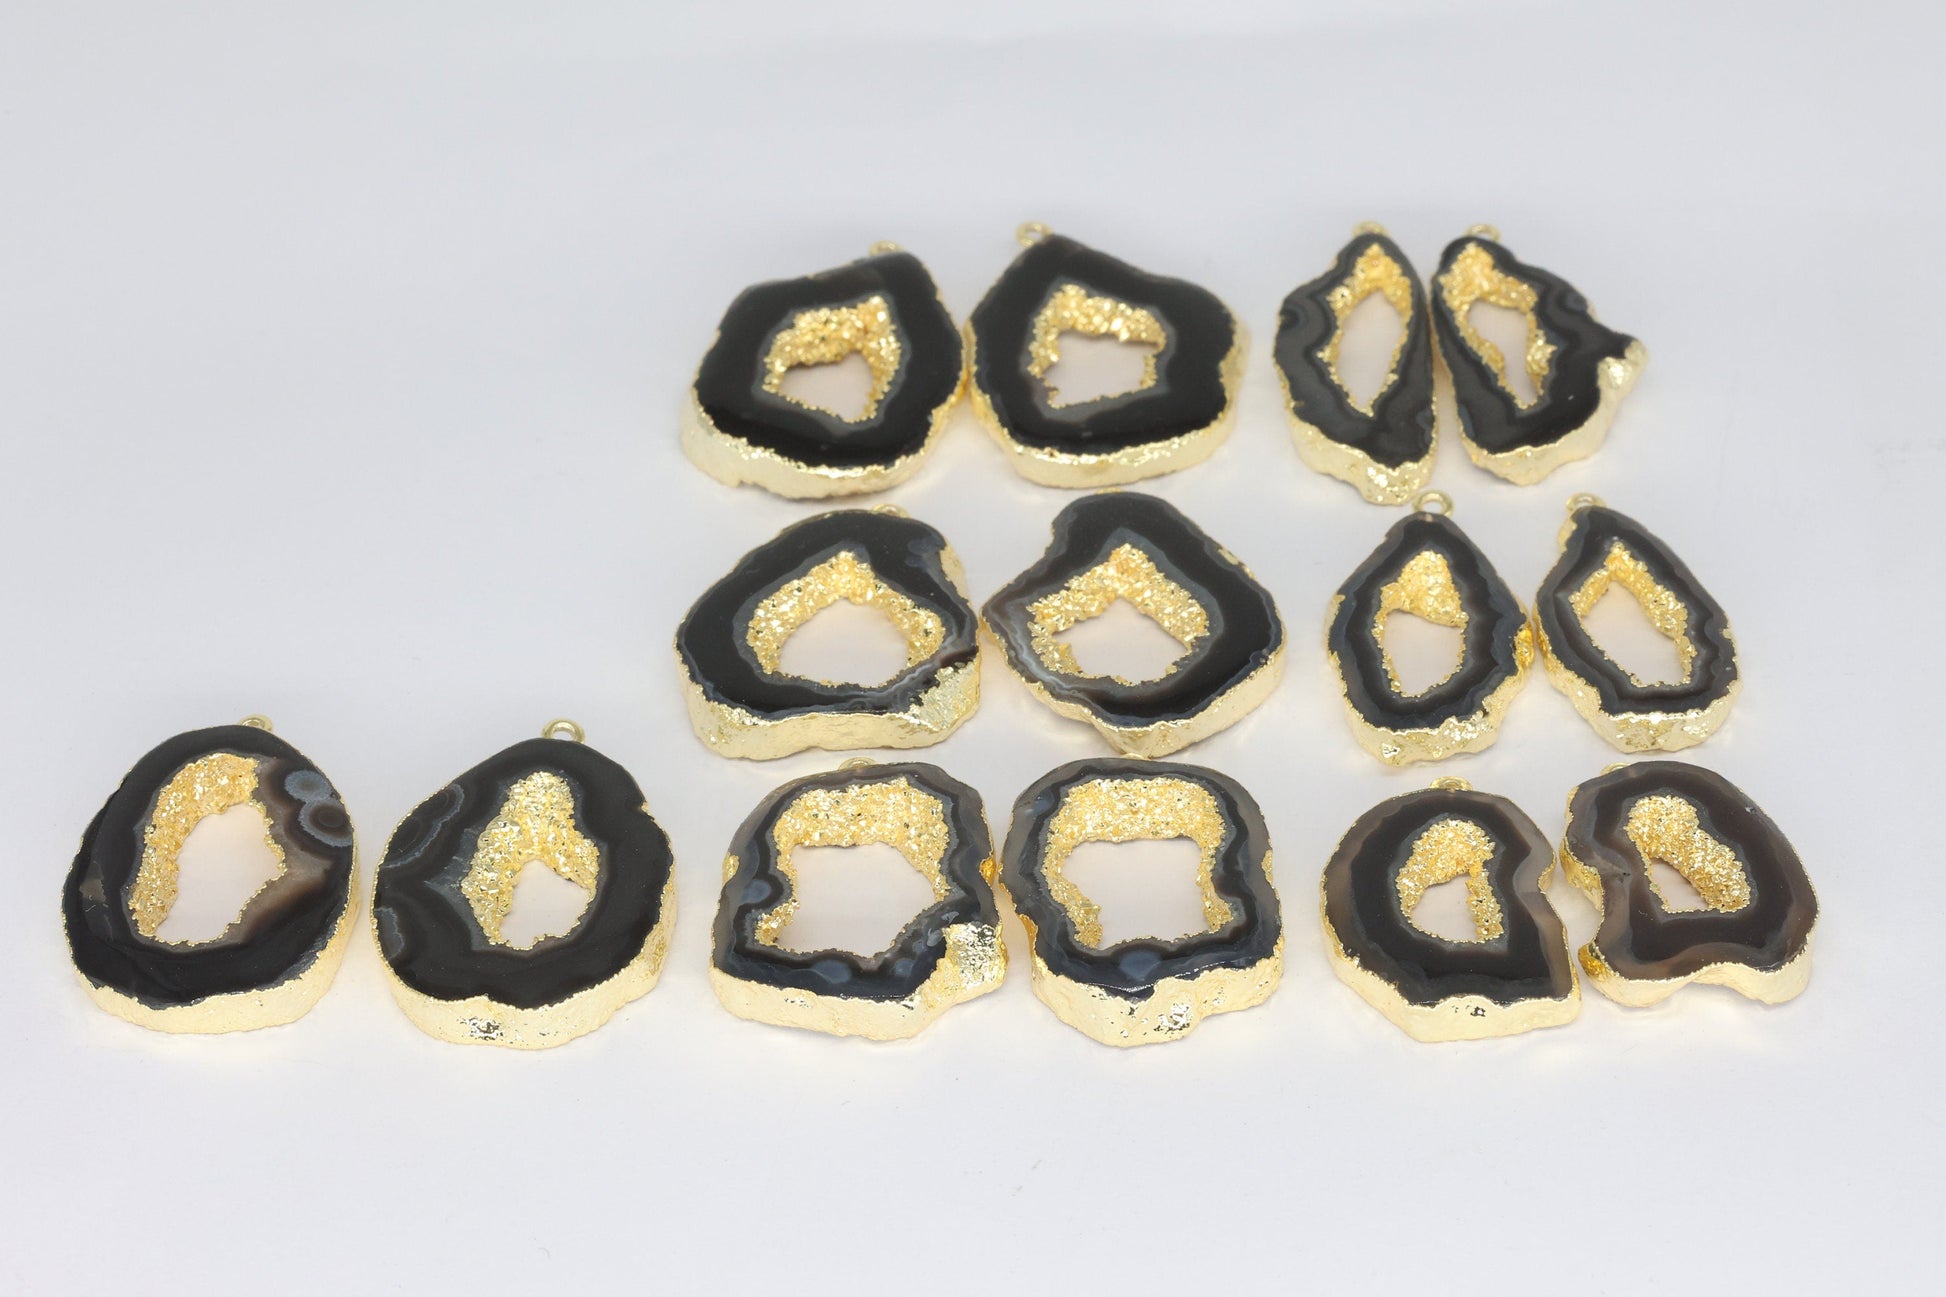 25 - 40 Agate geode slice pairs edged in gold double edged - Meena Design